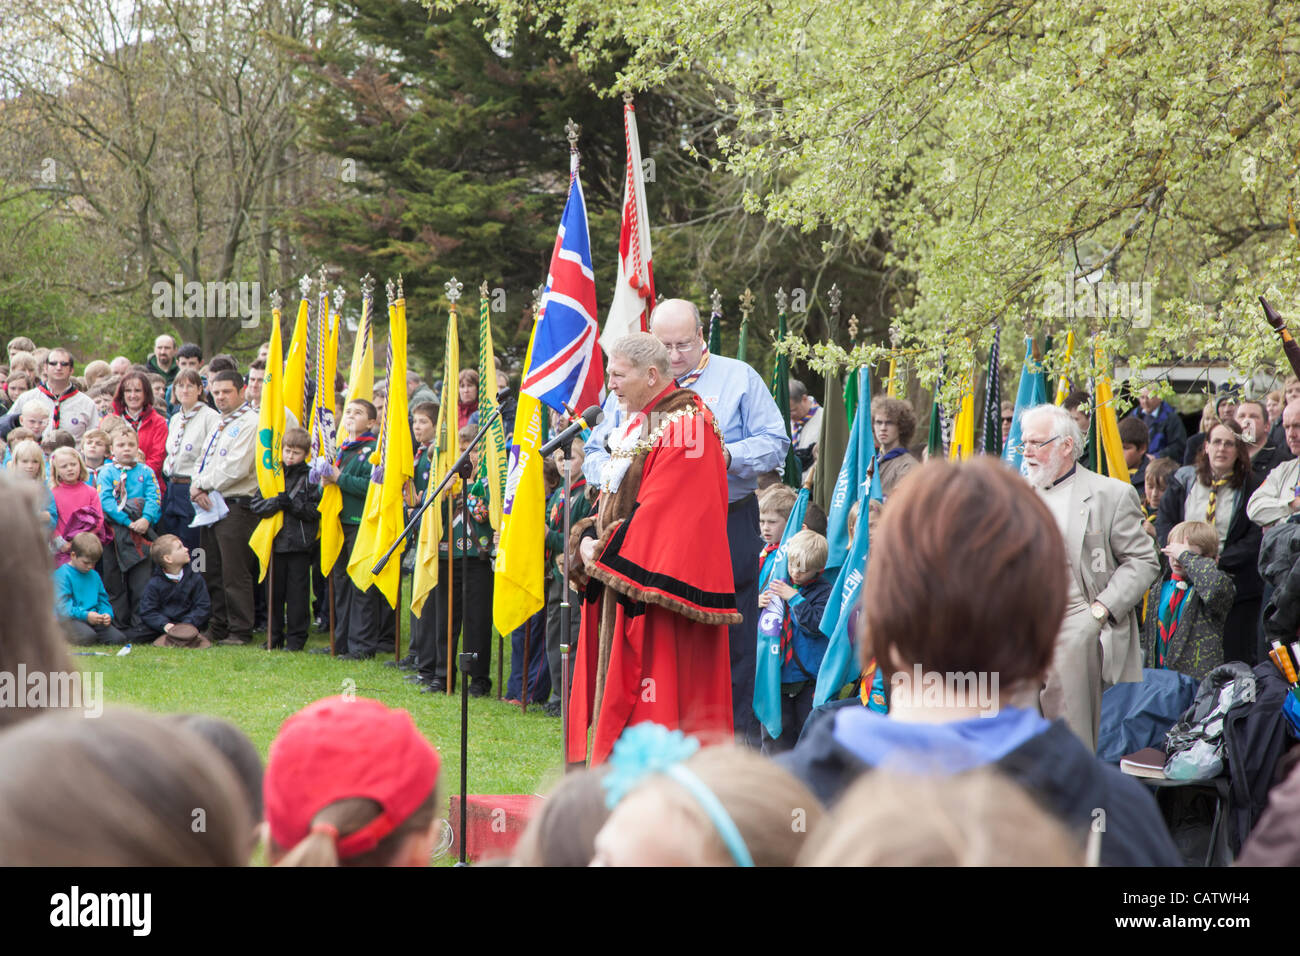 The Mayor of Taunton addressing the Girl Guides and Boy Scouts in Vivary Park, Taunton, Somerset, England on Sunday April 22nd 2012. This followed a parade through Taunton town centre to mark St Georges day, a traditional celebration of the patron Saint of England. Stock Photo